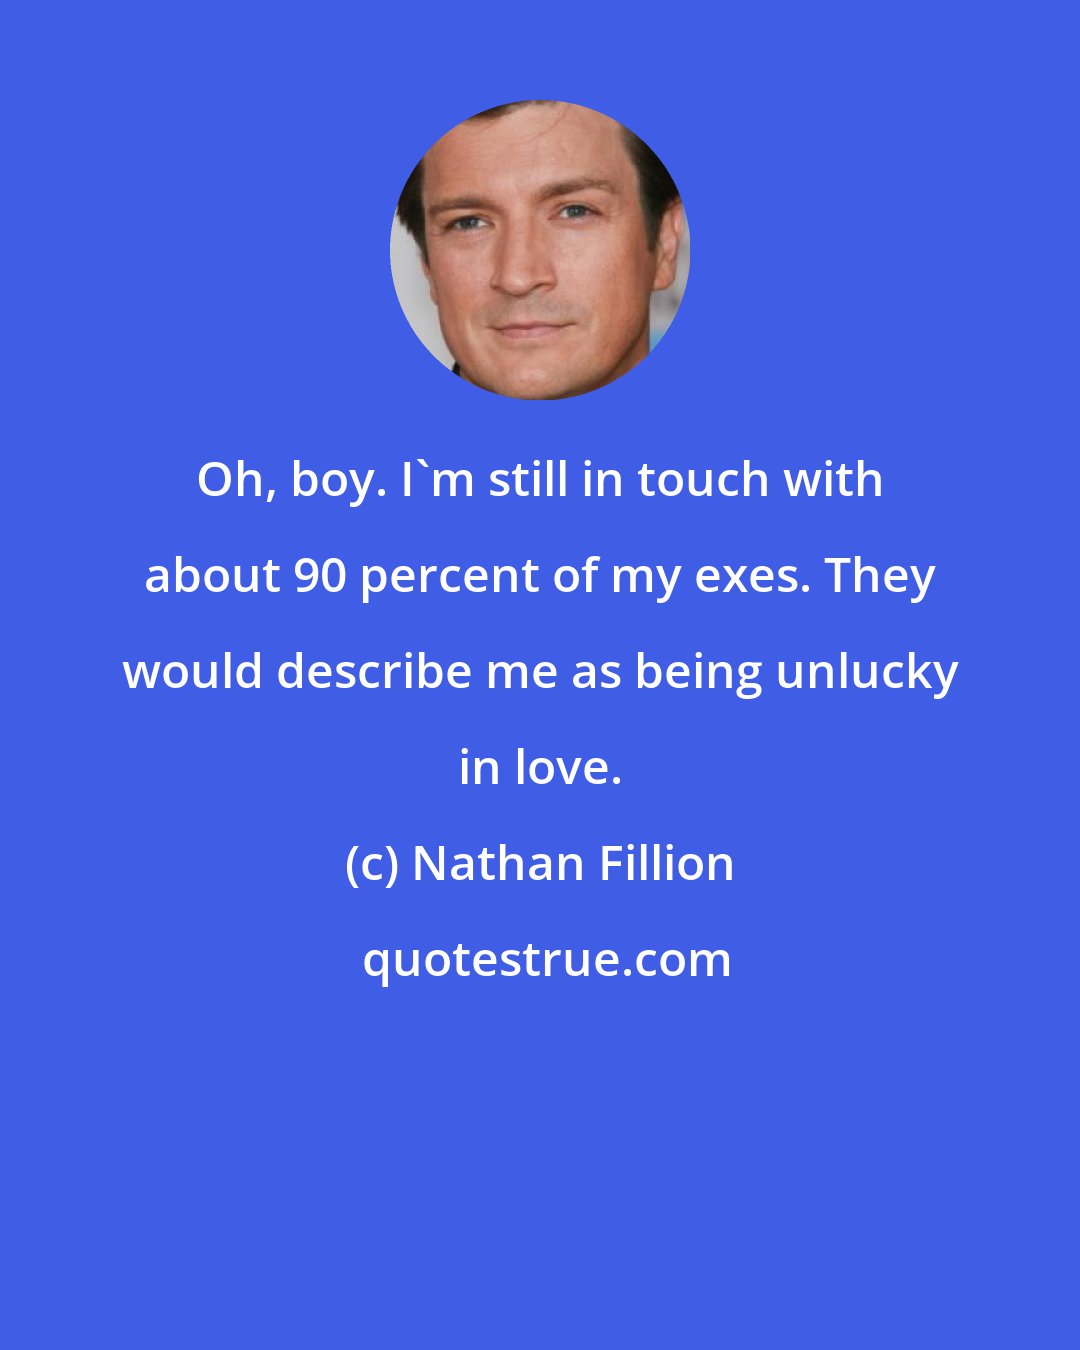 Nathan Fillion: Oh, boy. I'm still in touch with about 90 percent of my exes. They would describe me as being unlucky in love.